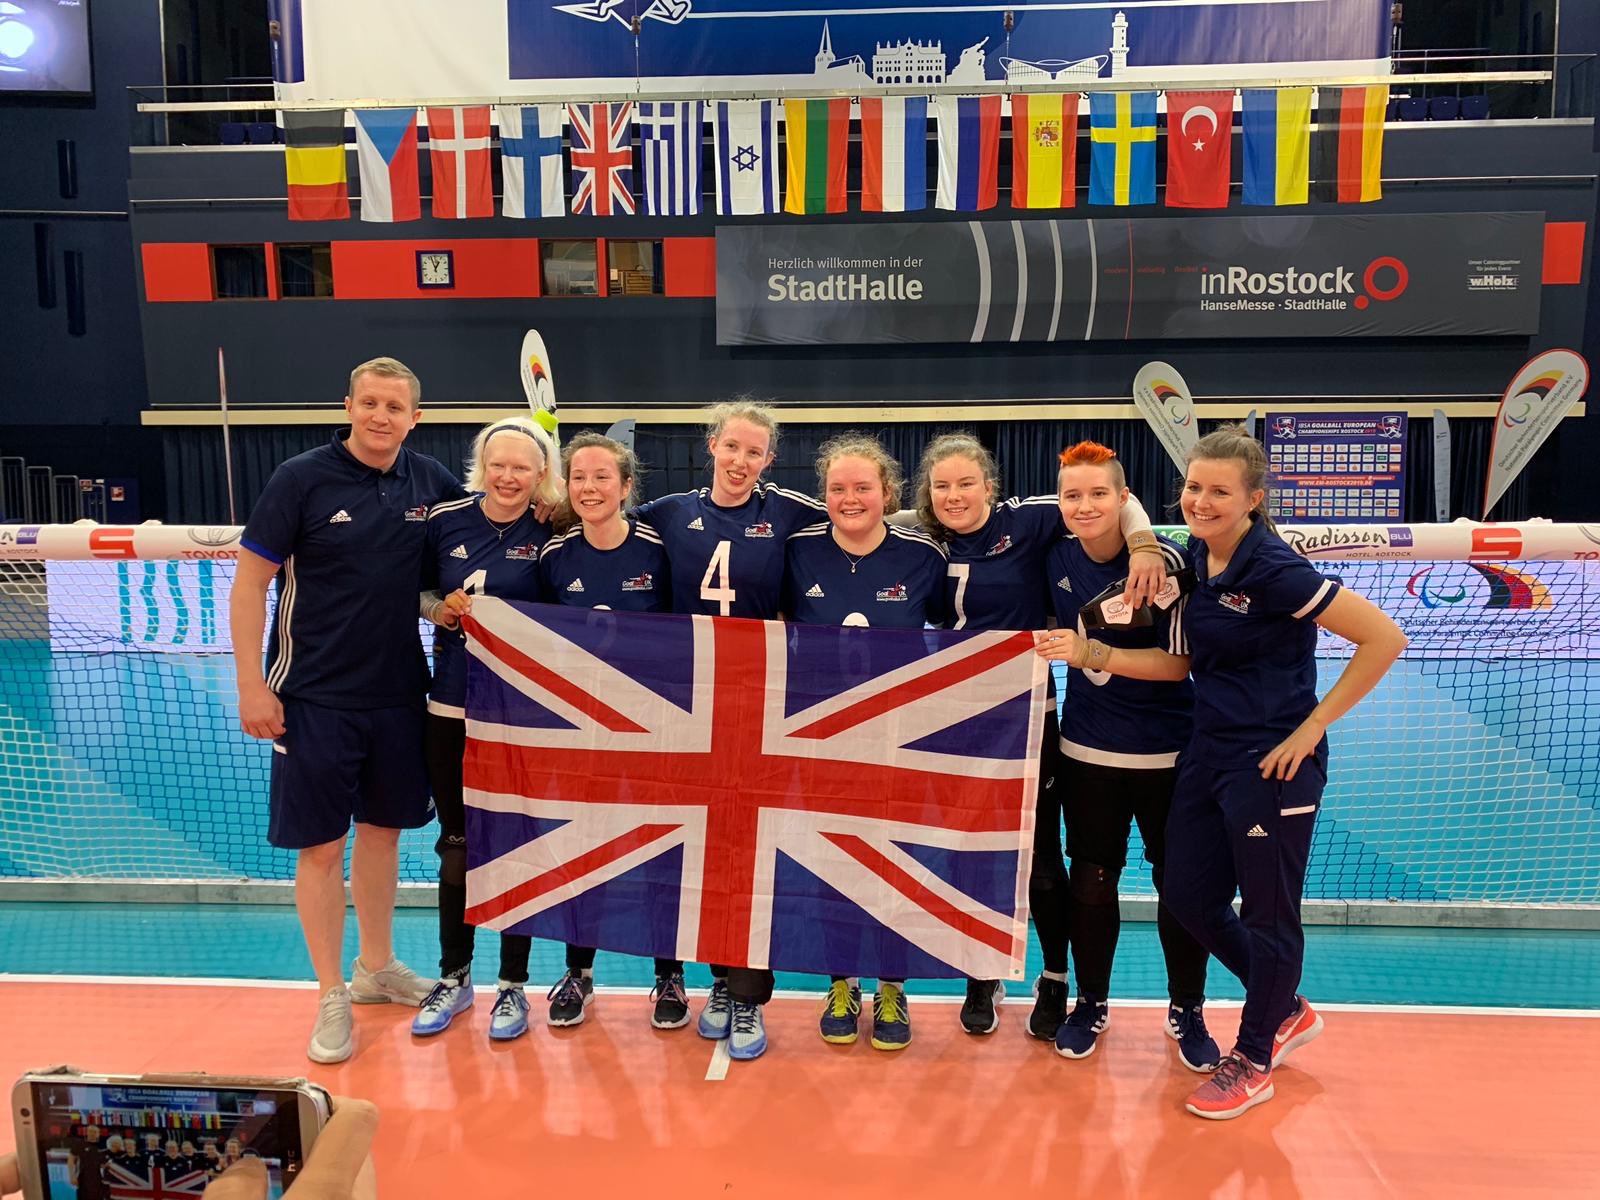 GB Women's team in at the 2019 European A Championships in Rostock, Germany.